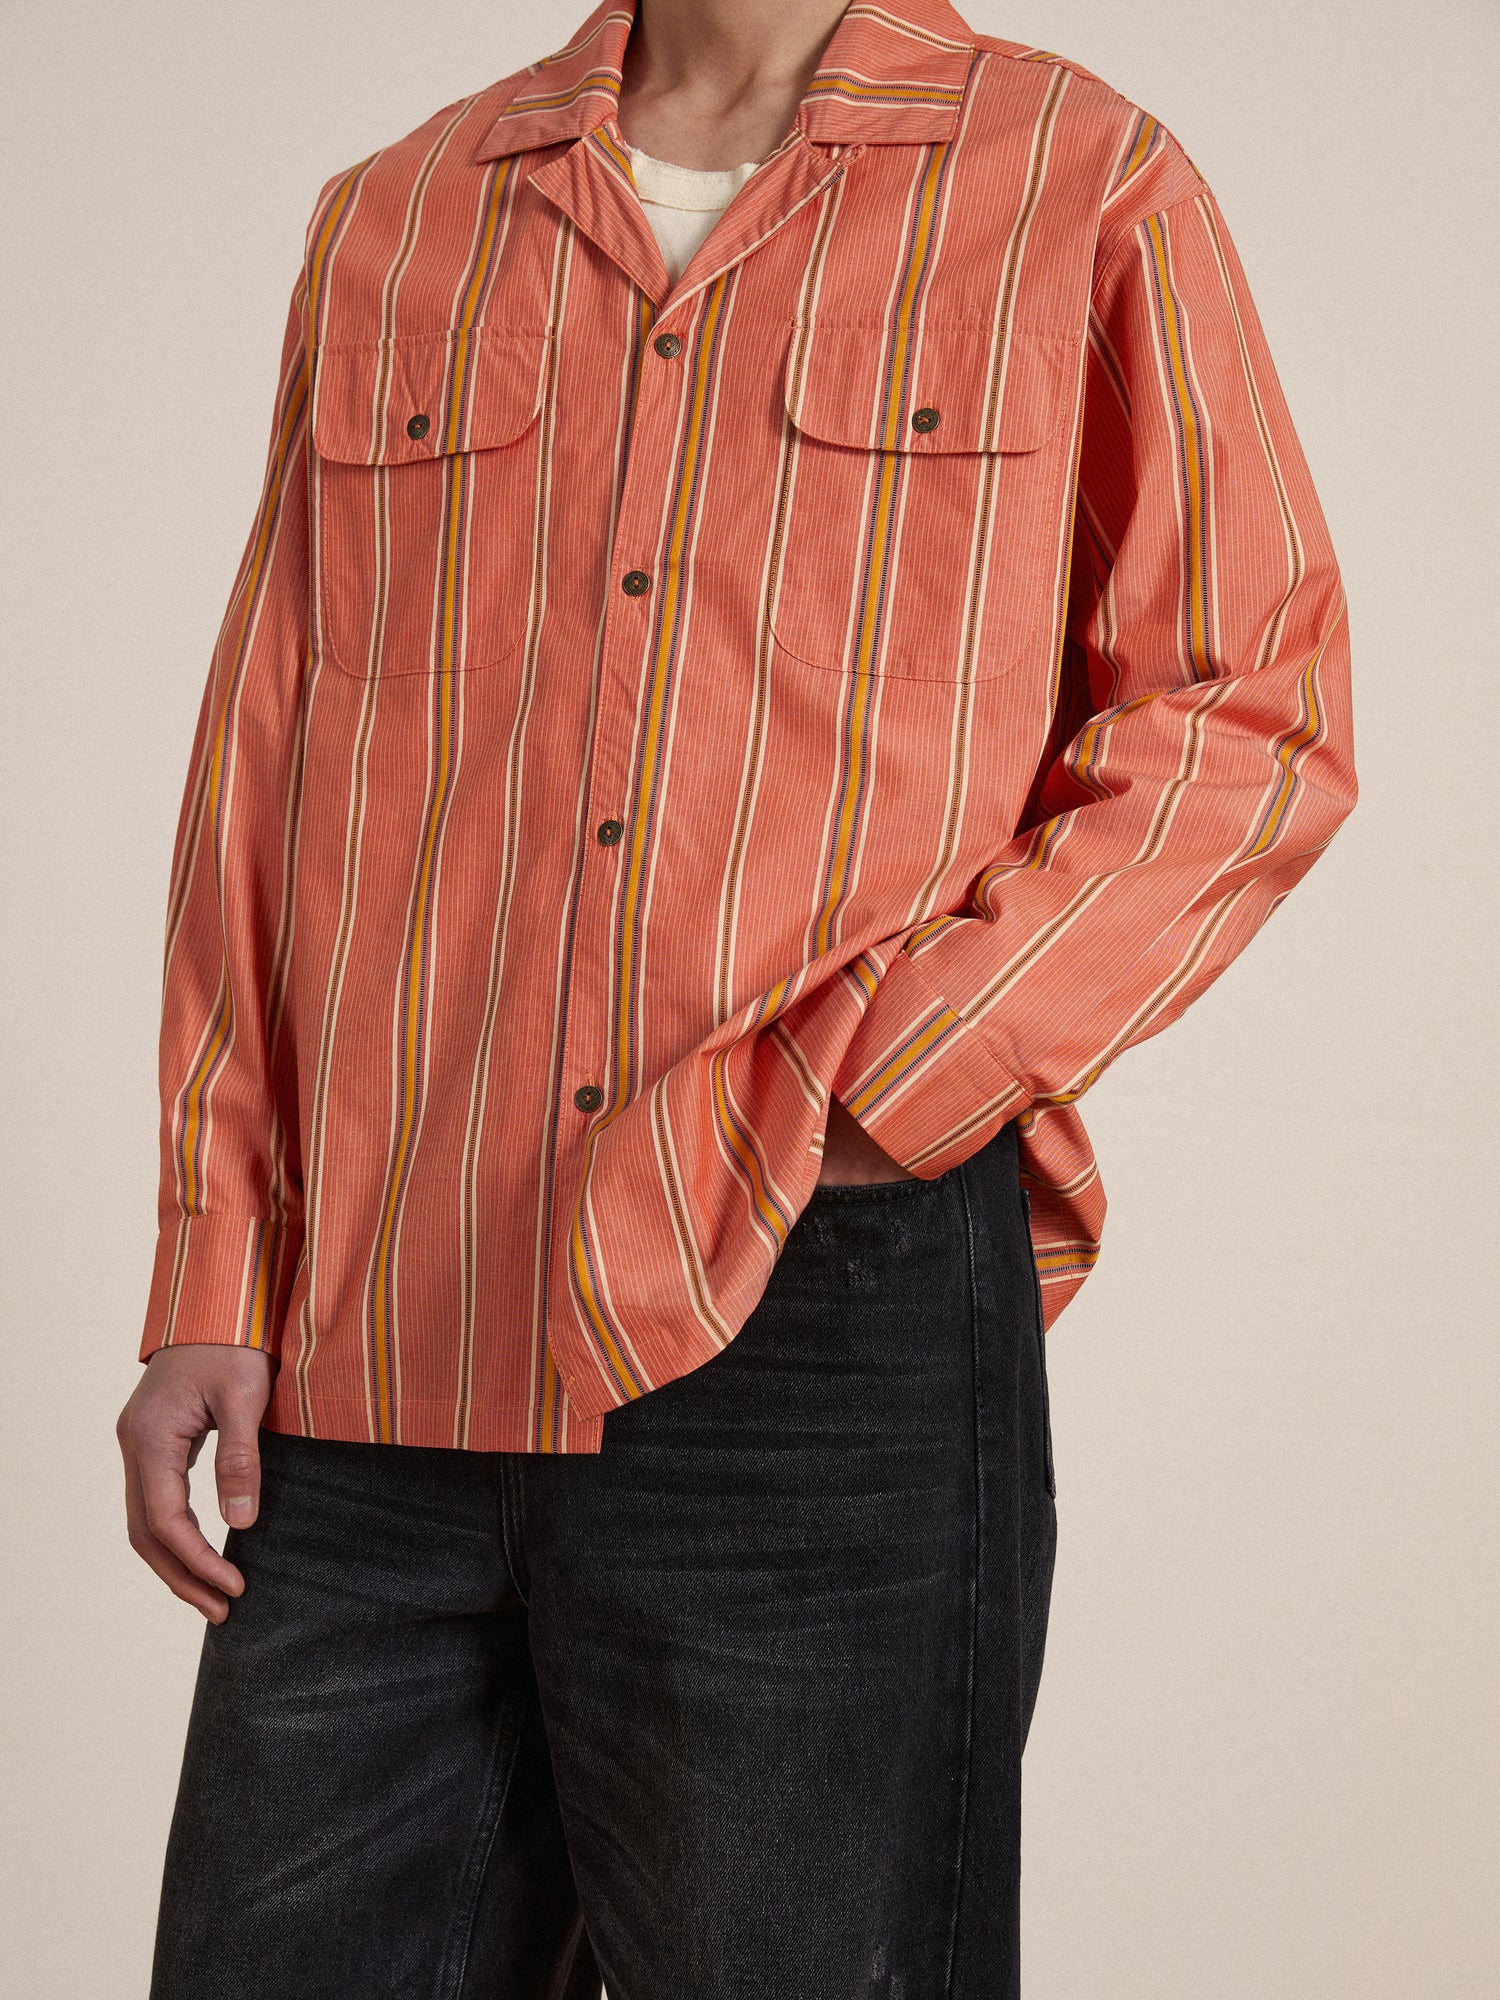 A man wearing an orange Found Stripe Citrus Long Sleeve Camp Shirt and jeans.